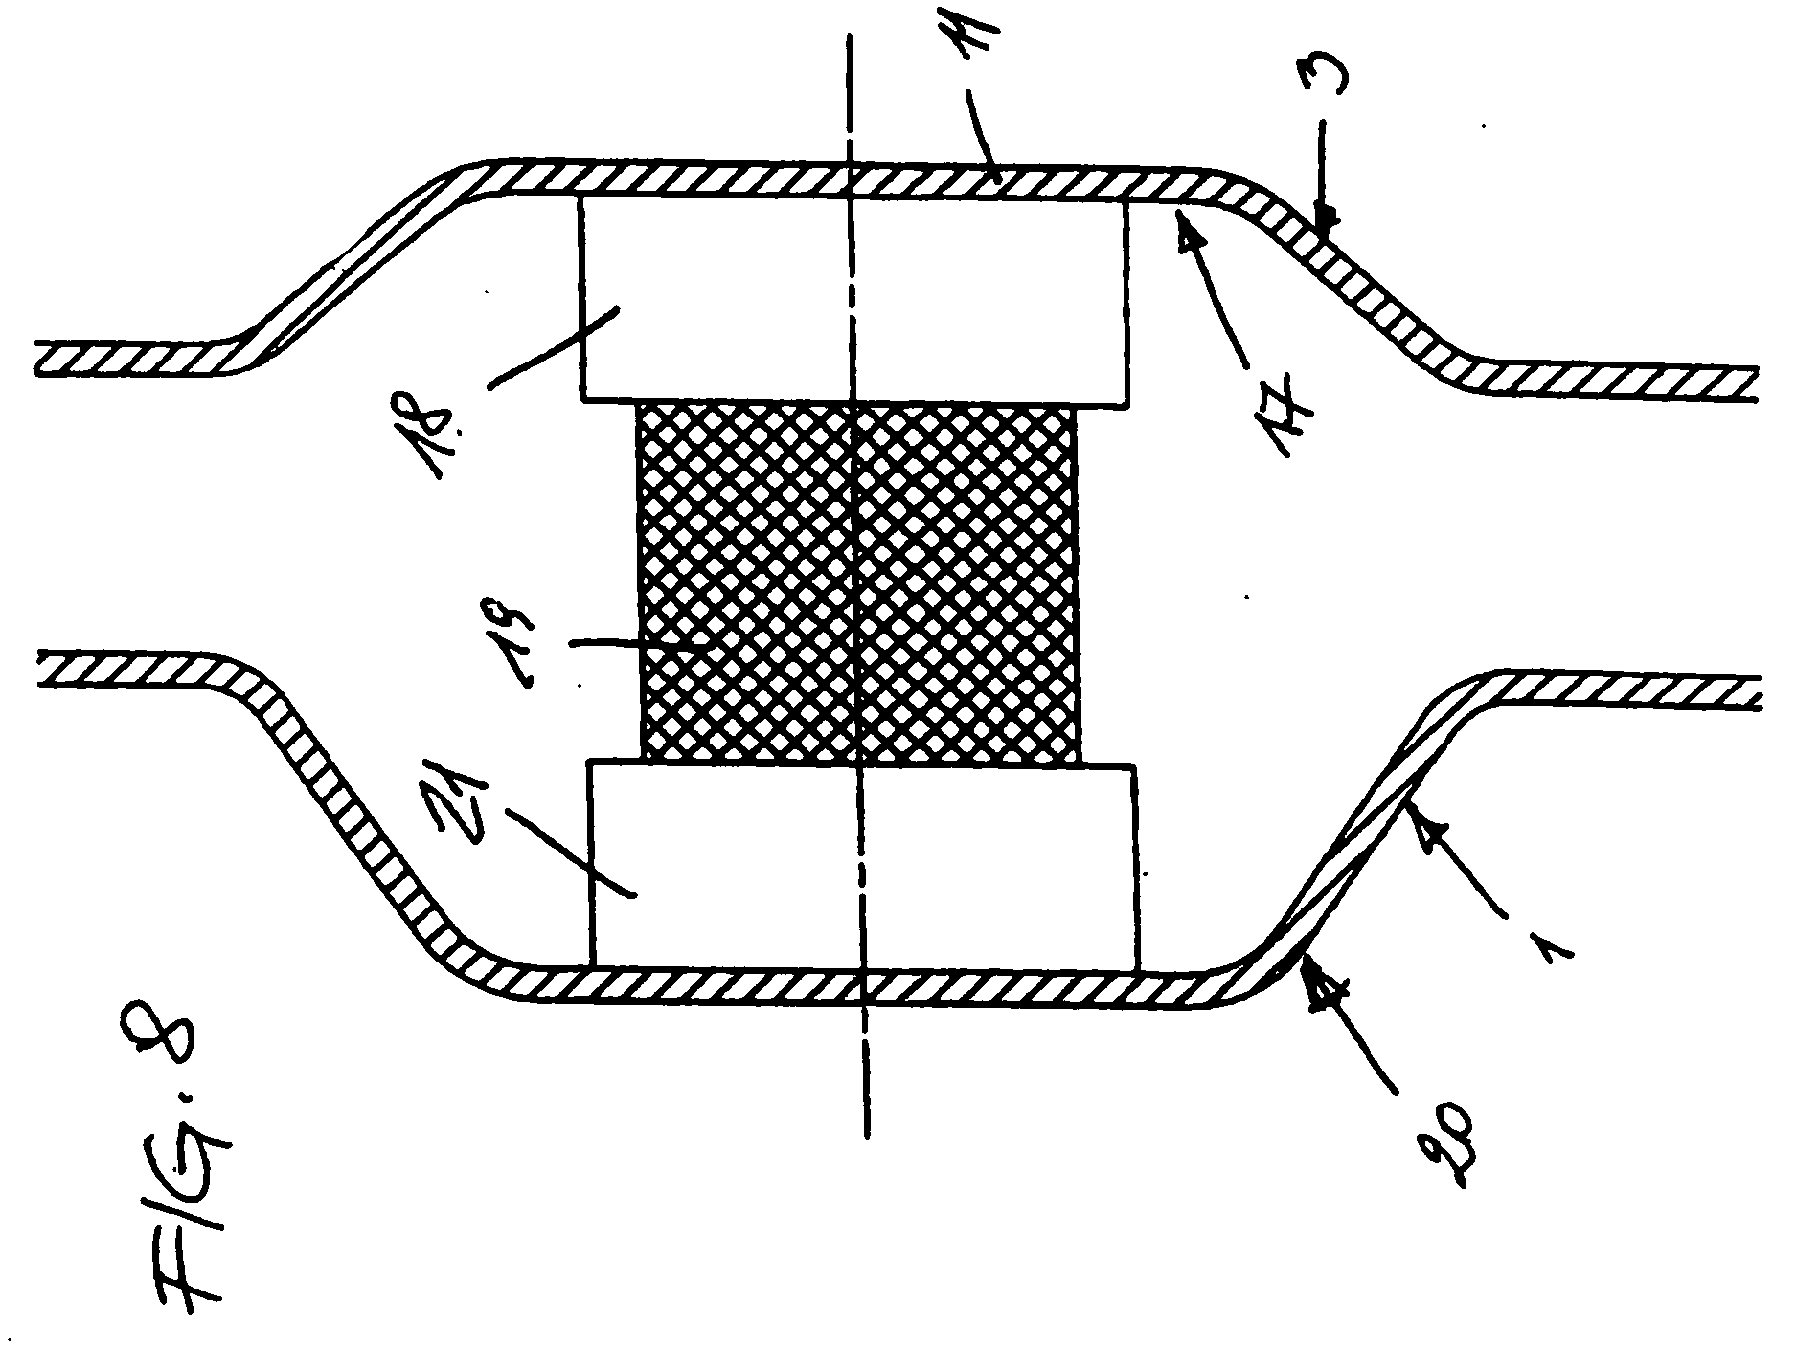 Inner container surrounded by an outer container, used for receiving a cryogenic liquid